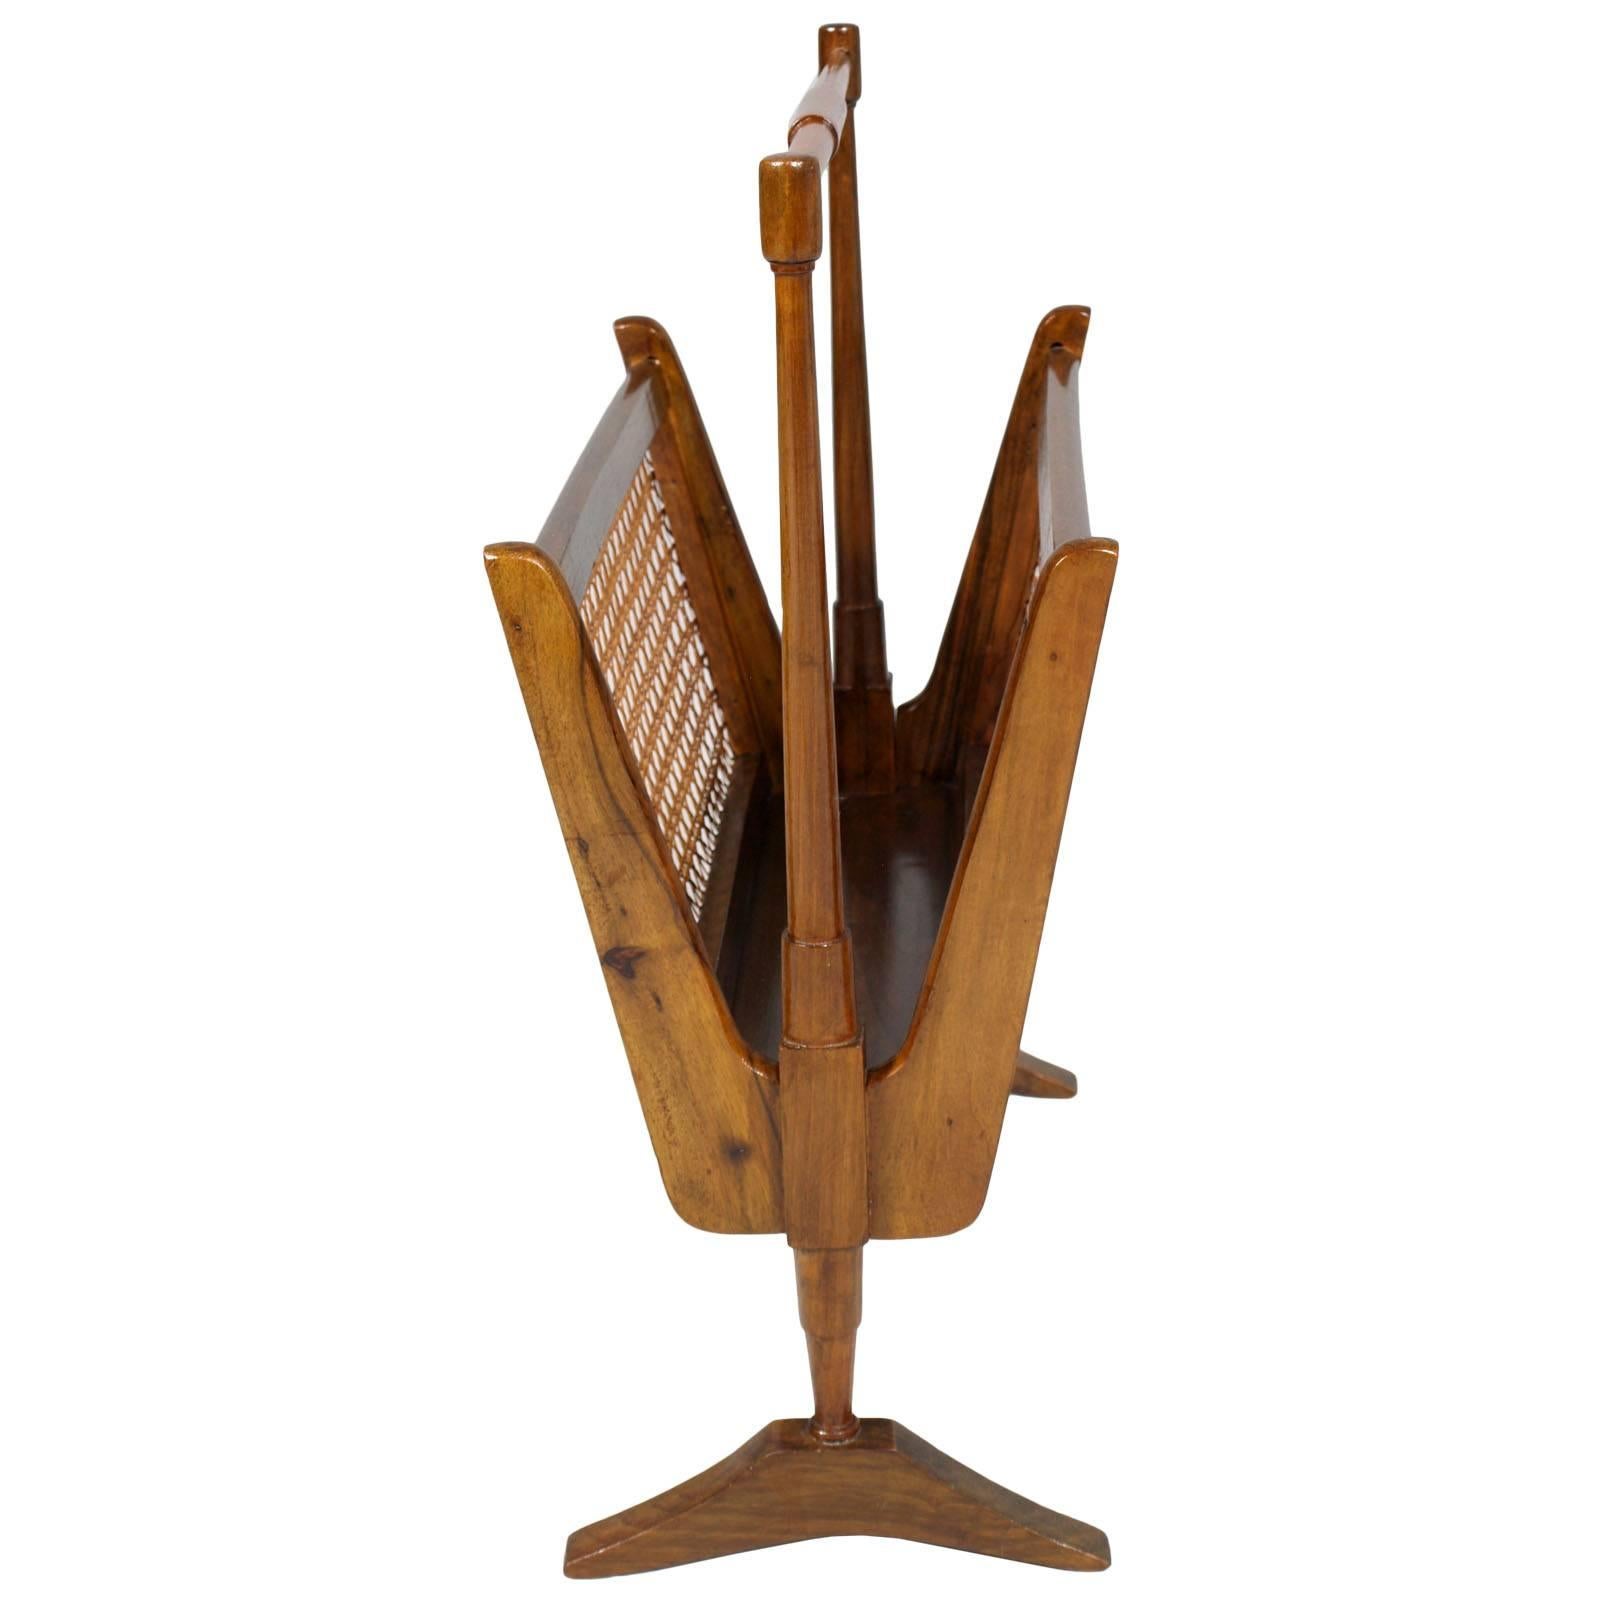 Italian Art Deco magazine rack Gio Ponti style, walnut and Vienna straw polished to wax. Excellent conditions

Measures cm: H 53, W 45, D 25.